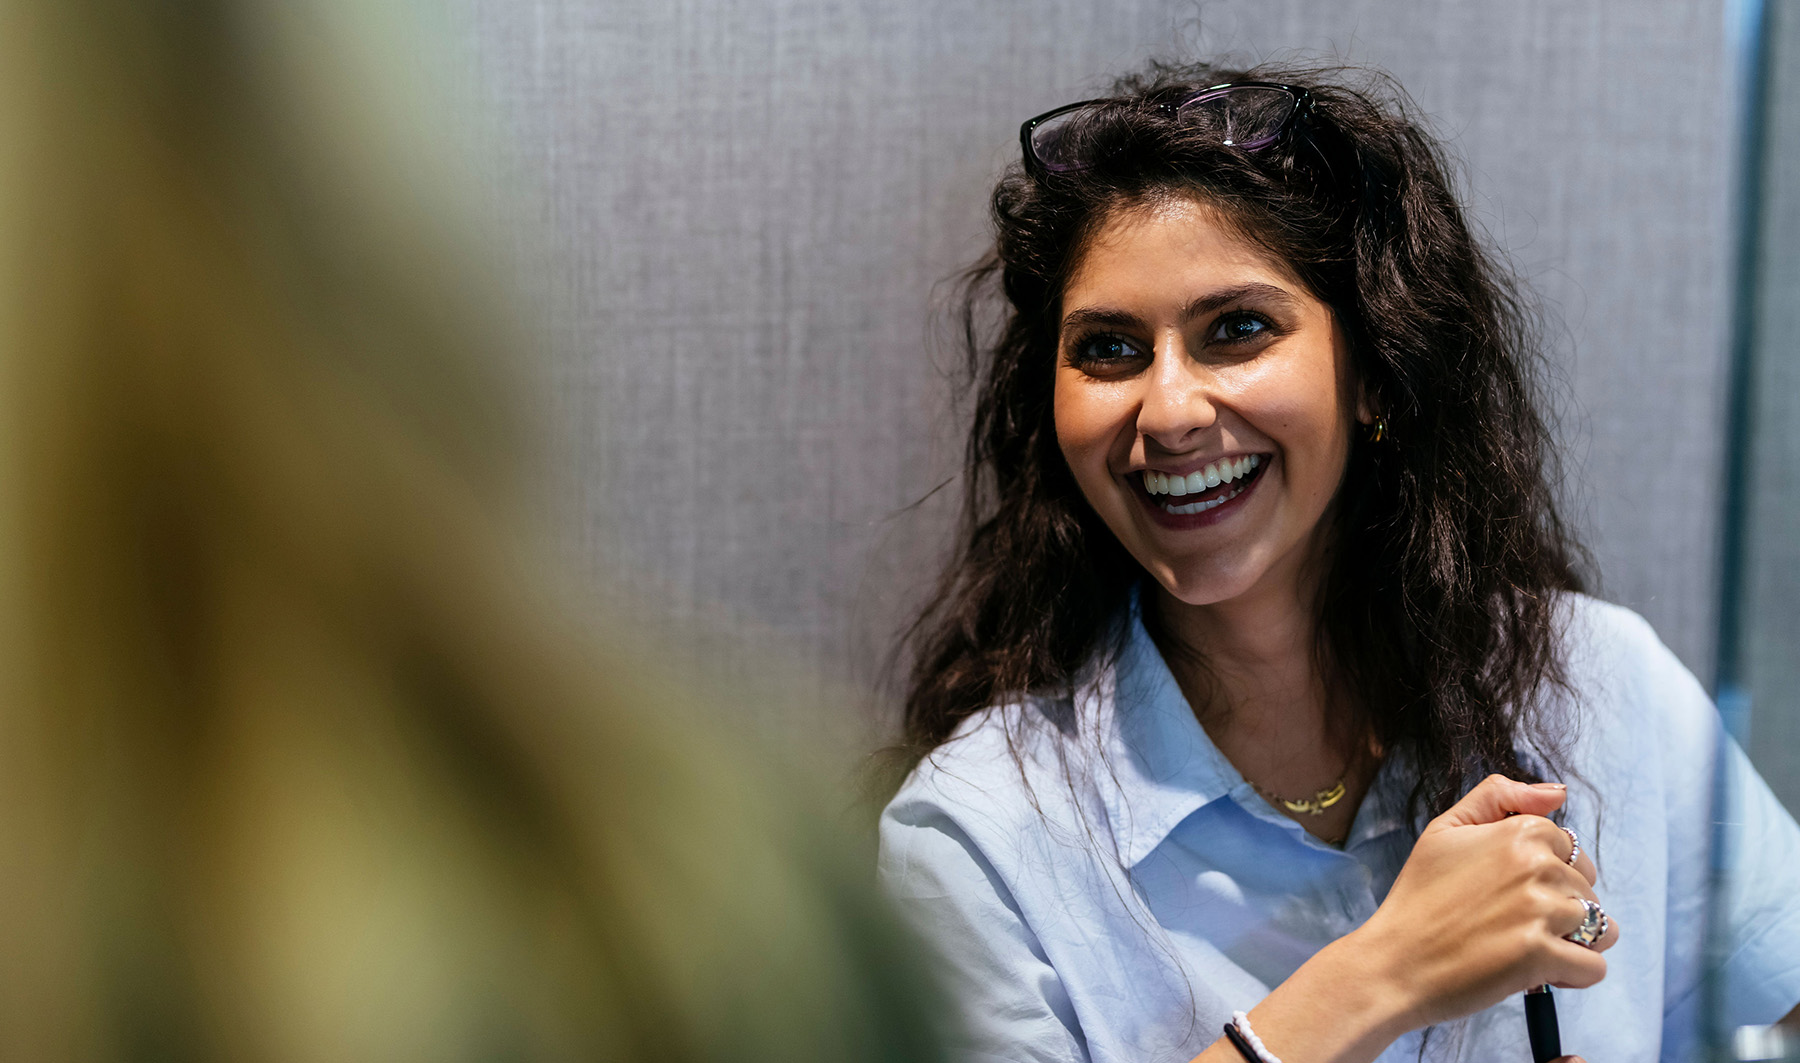 Smiling woman with curly hair laughing at colleague during a meeting